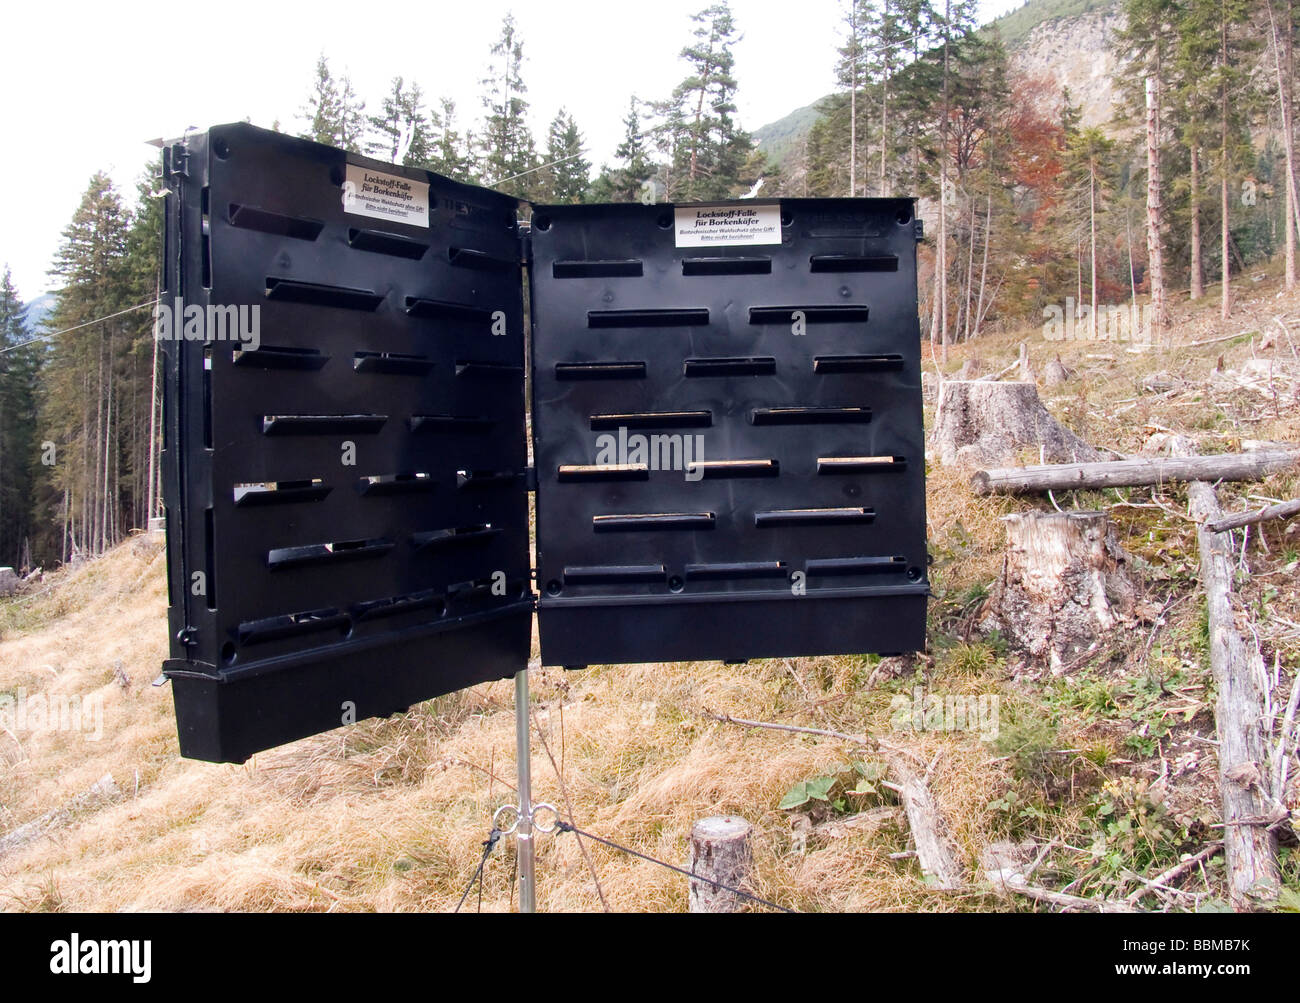 Insect trap for bark beetles, bioengineering, forest protection without toxic substances, Karwendel Range, Tyrol, Austria, Euro Stock Photo